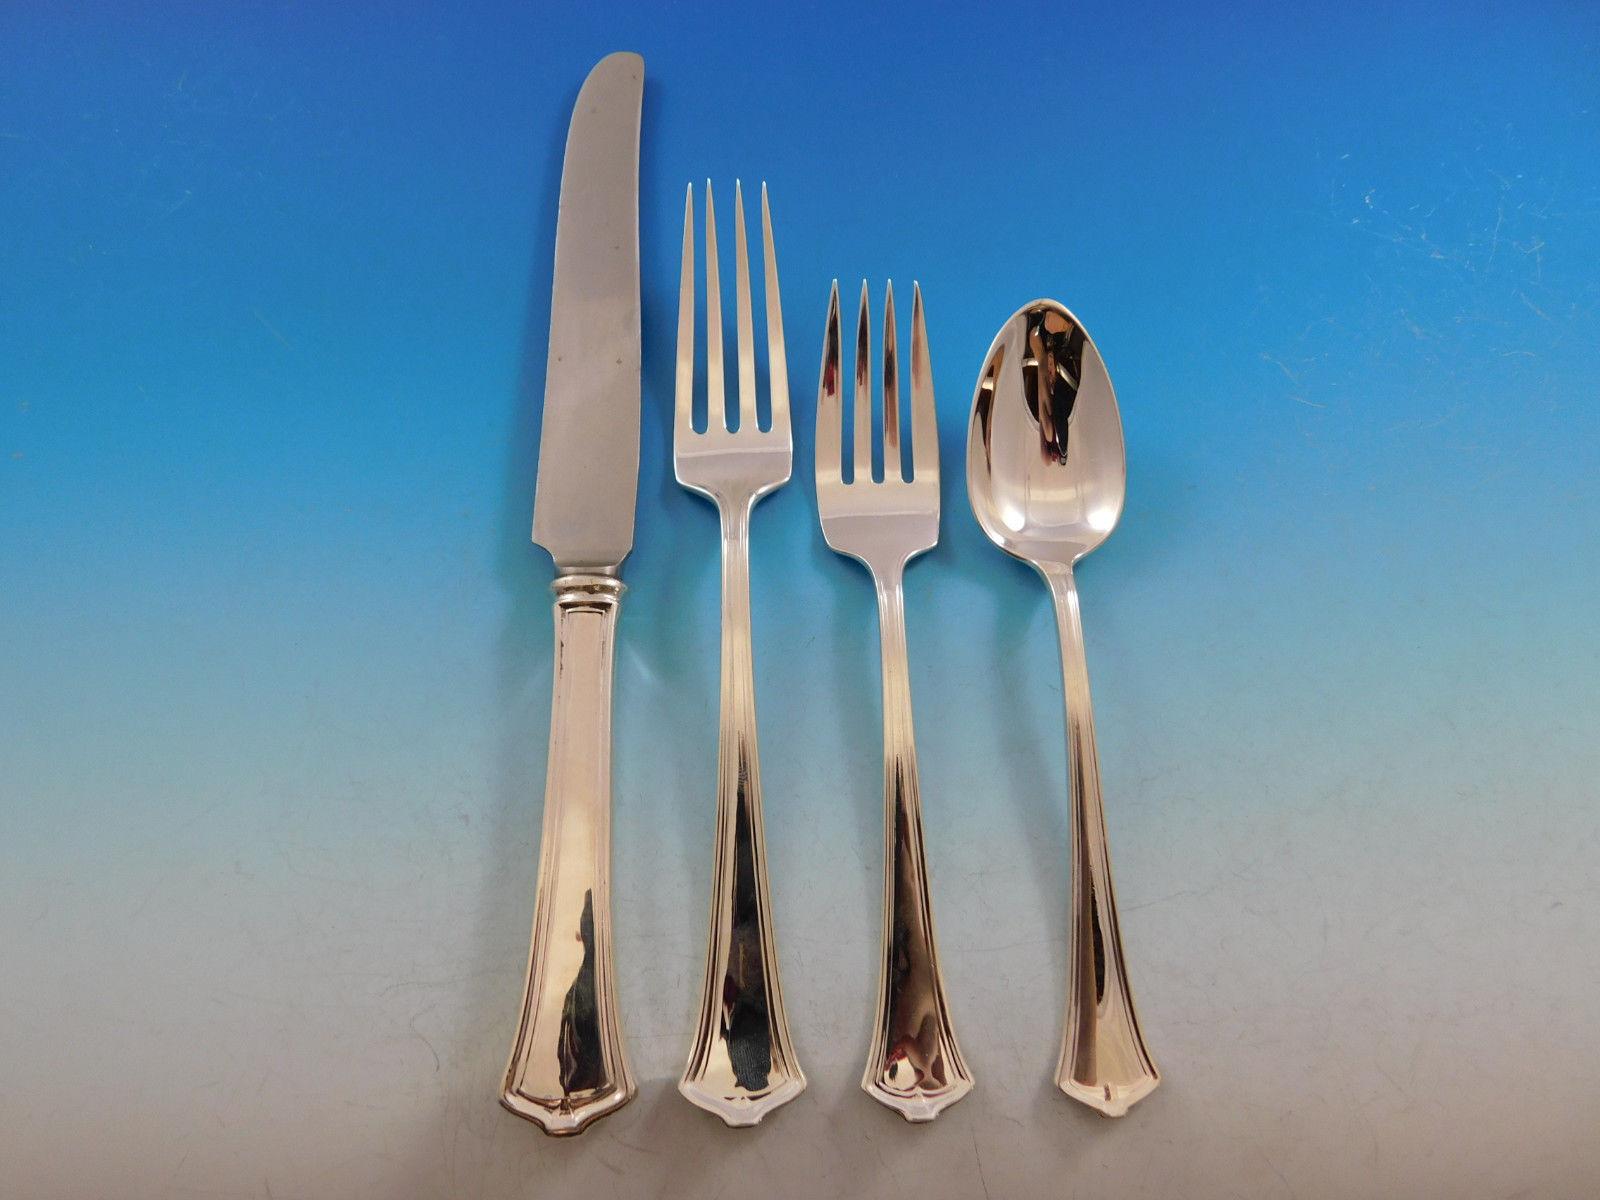 America by Wallace, circa 1915, sterling silver flatware set of 32 pieces. Great starter set! This set includes:

6 Knives, 8 3/4